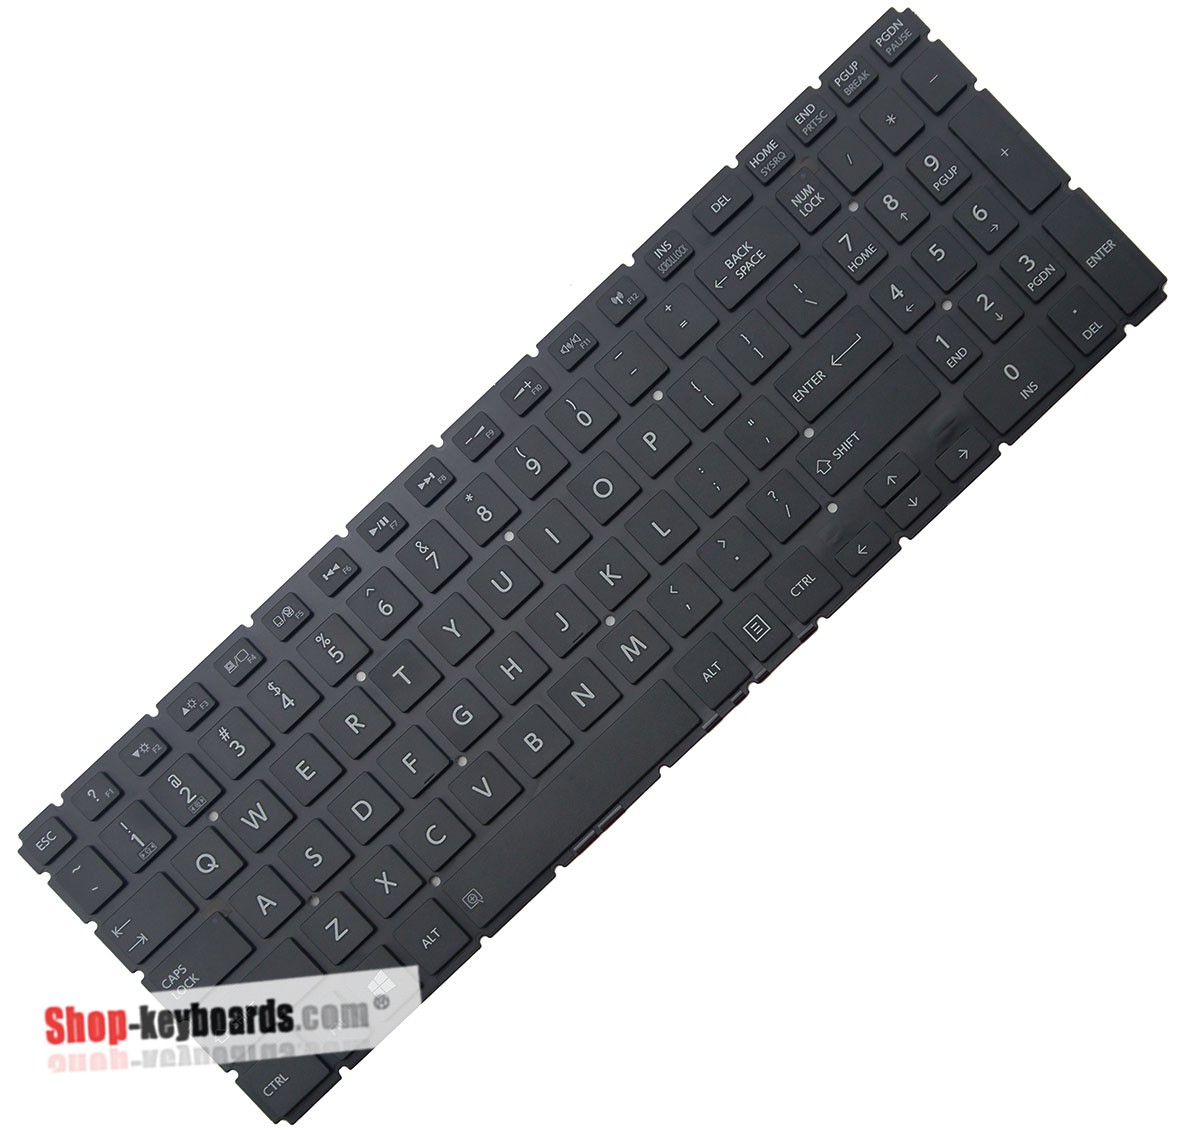 Toshiba MP-13R83A0-9201 Keyboard replacement